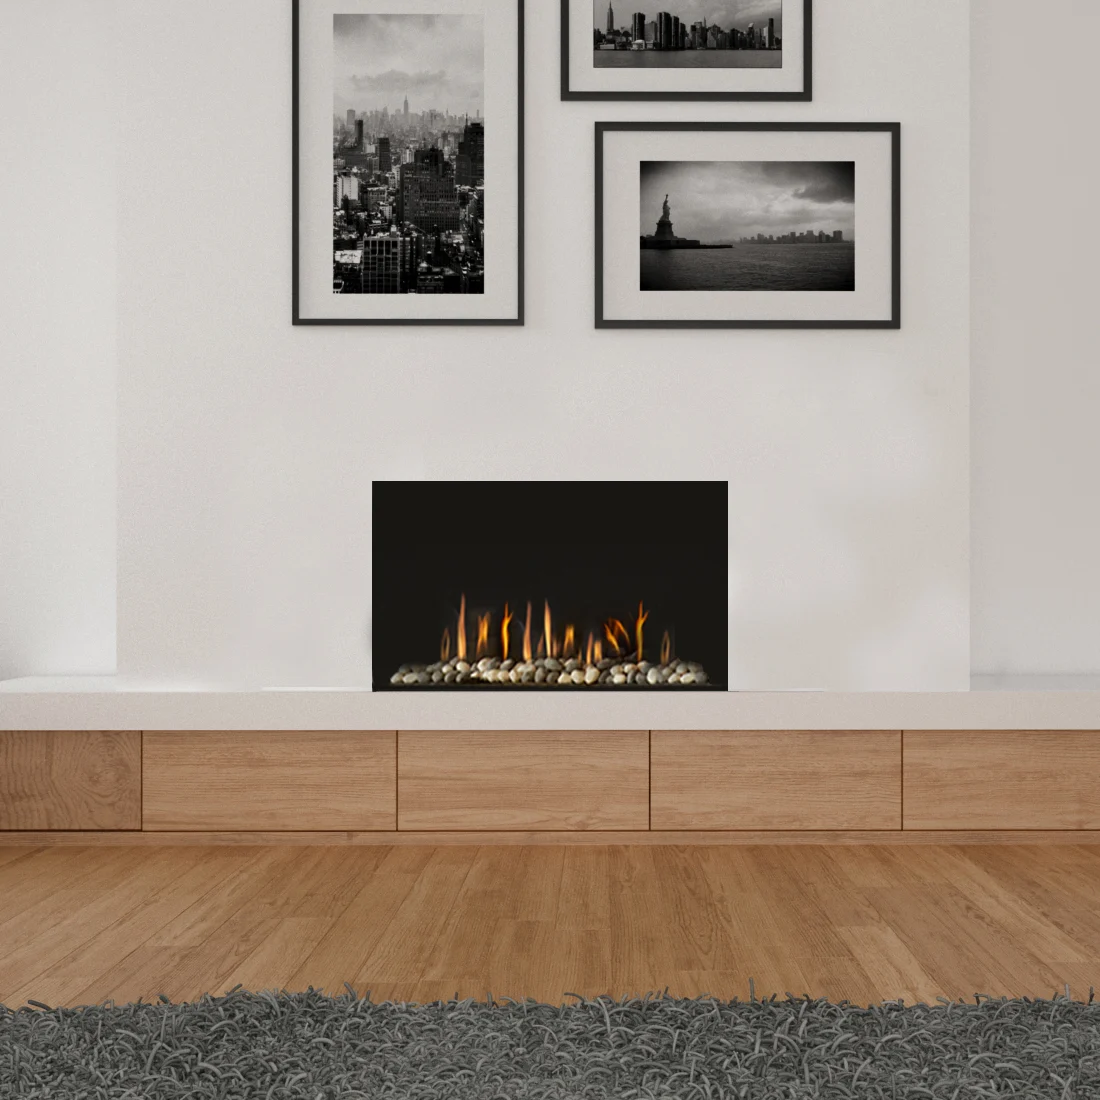 Ortal Fireplaces - The Heating Lodge